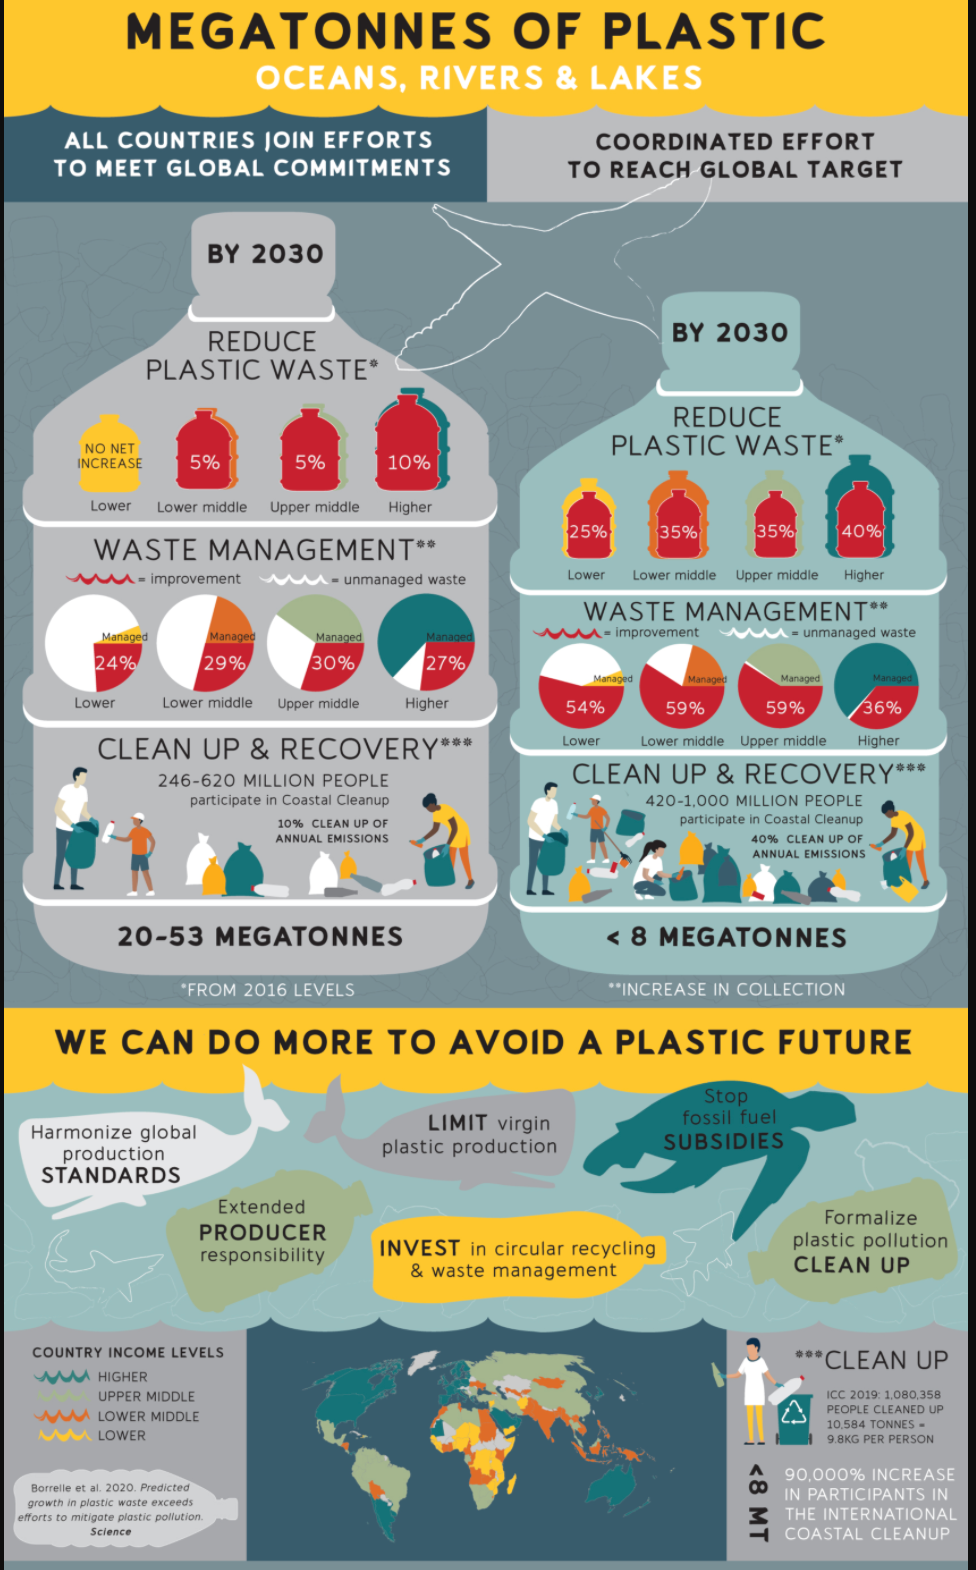 New research led by ecologists at the University of Toronto examining annual plastic pollution entering oceans, rivers and lakes around the world, outlines potential impacts of various mitigation strategies over the coming decade